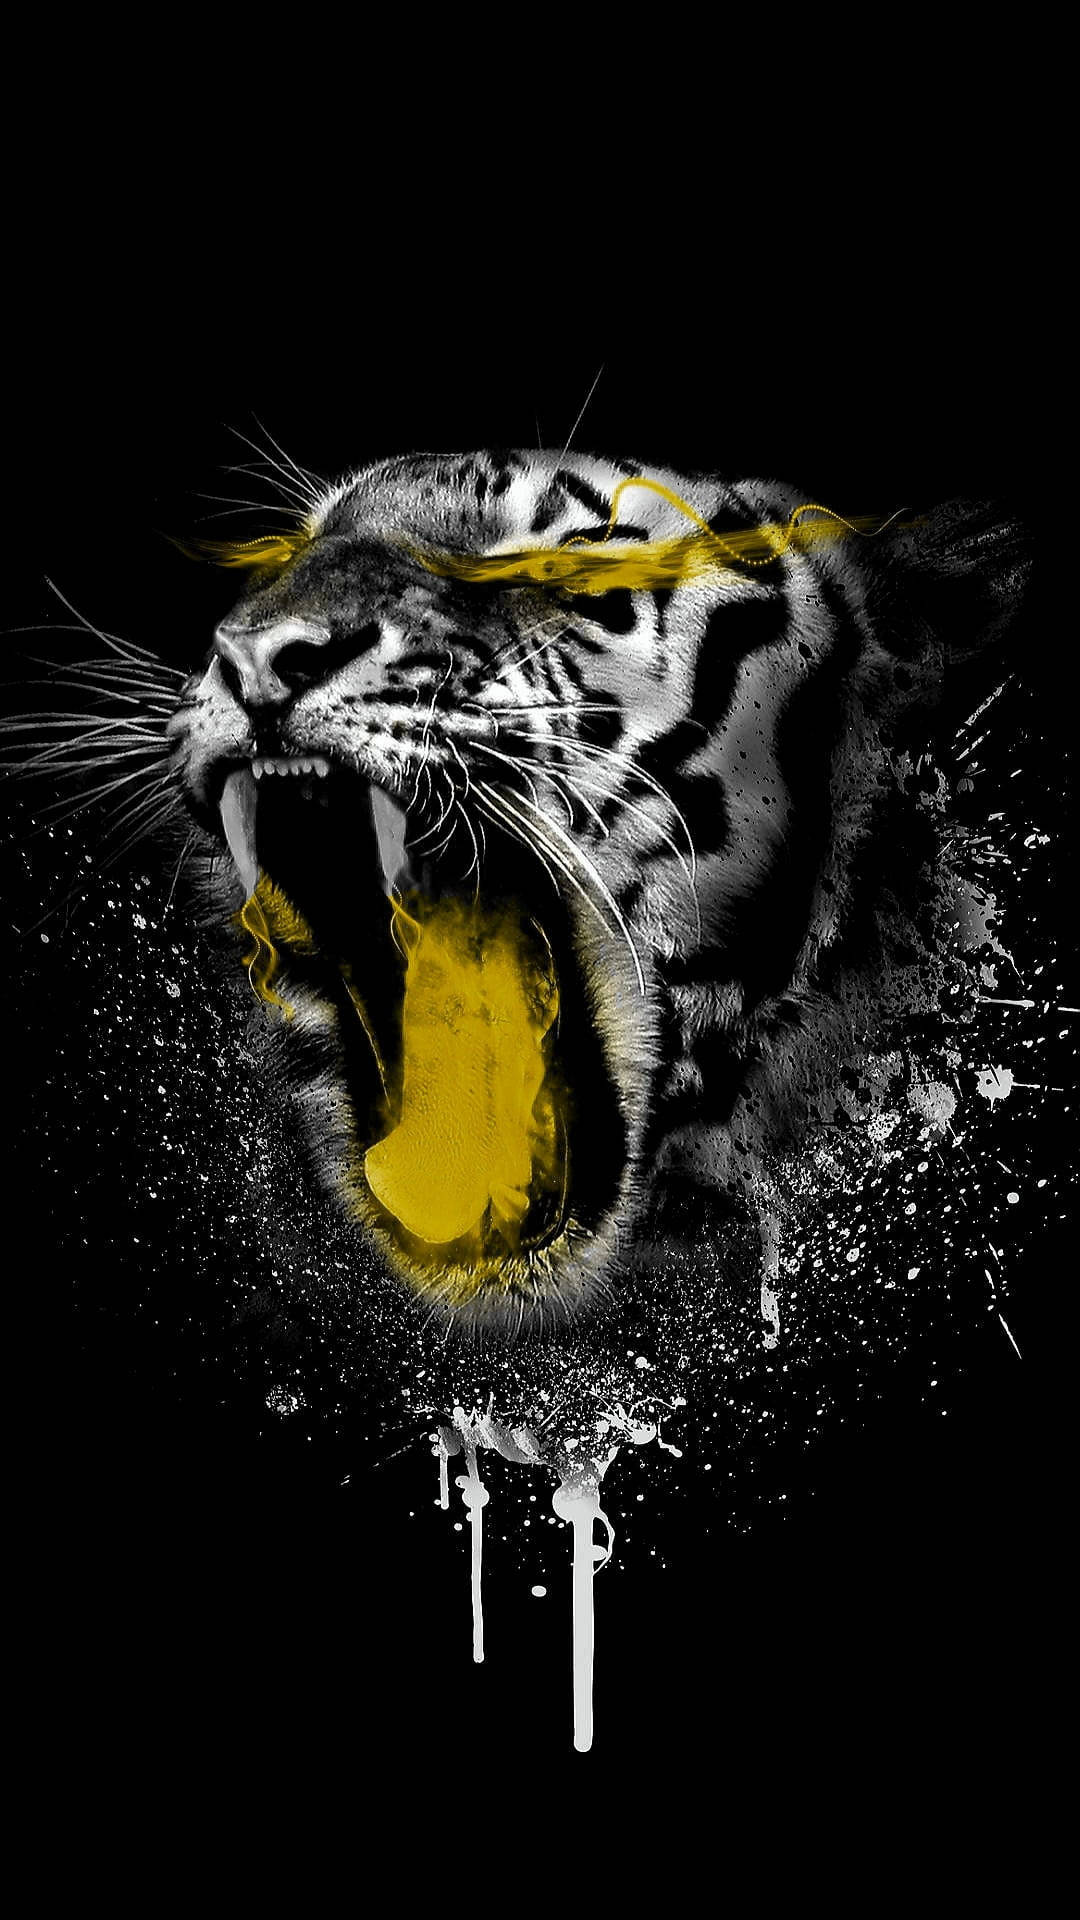 Black Tiger With Gold Accents